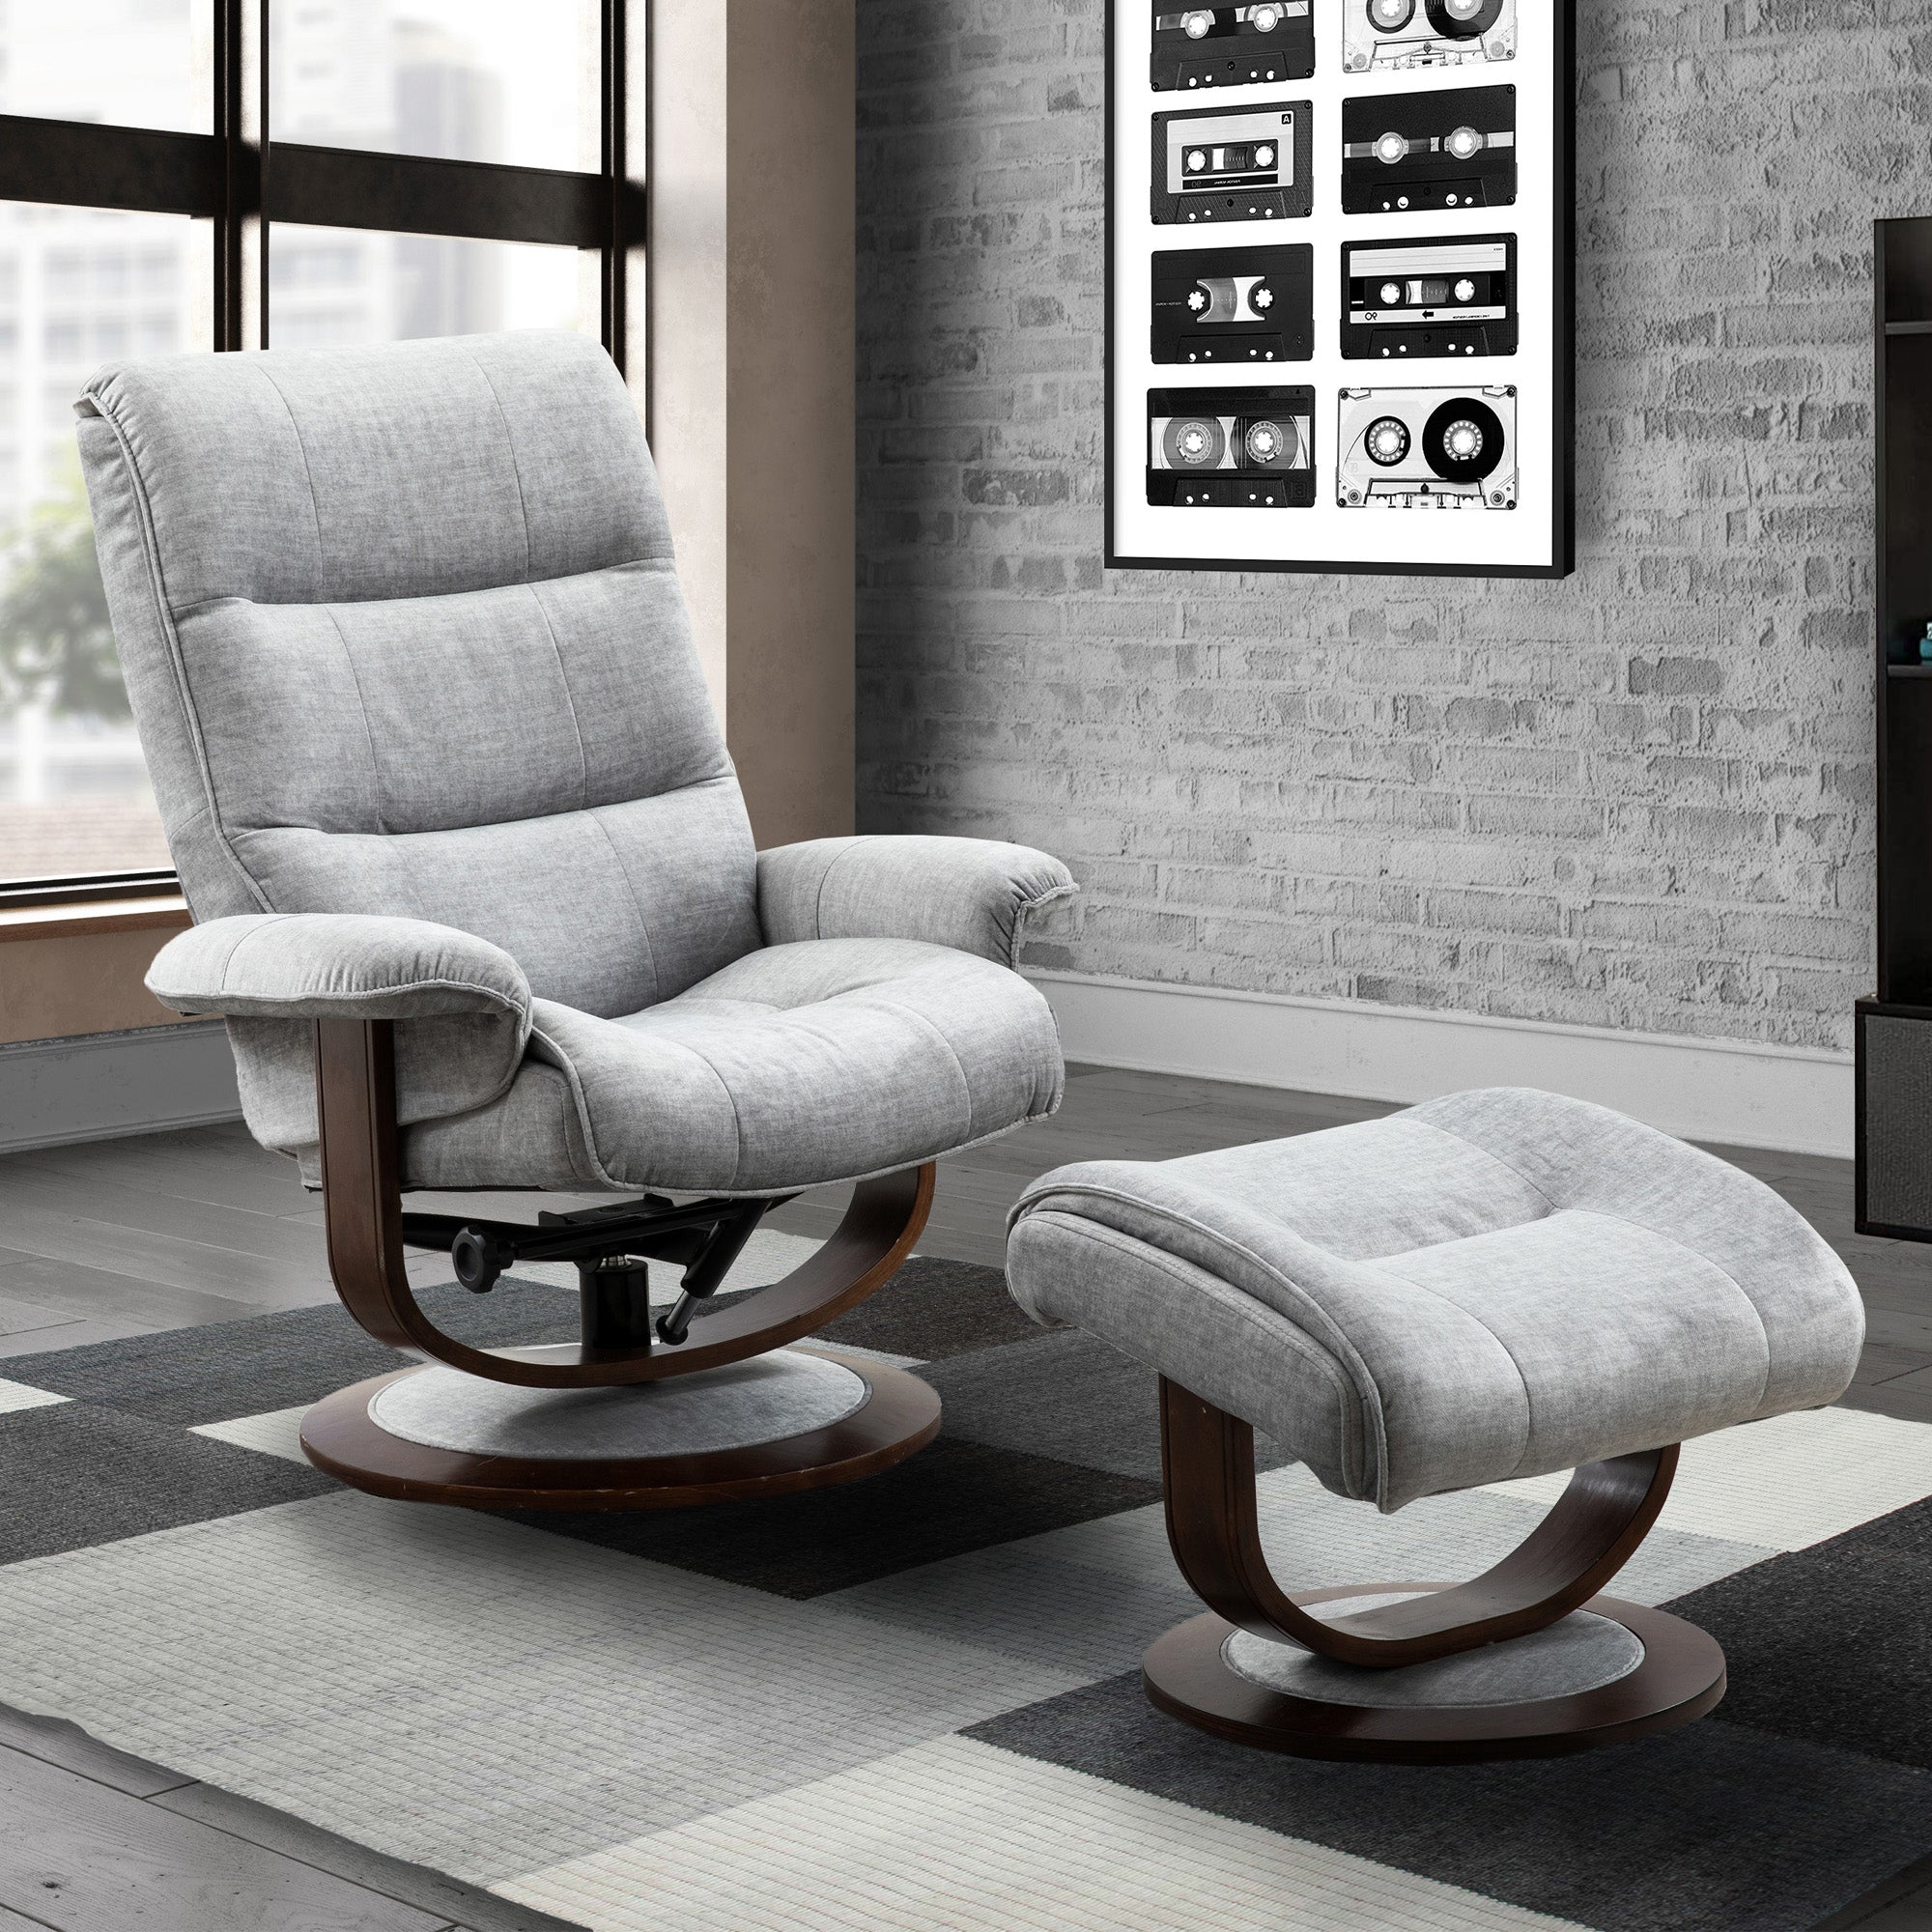 KNIGHT - ICE Manual Reclining Swivel Chair and Ottoman - Parker House ...